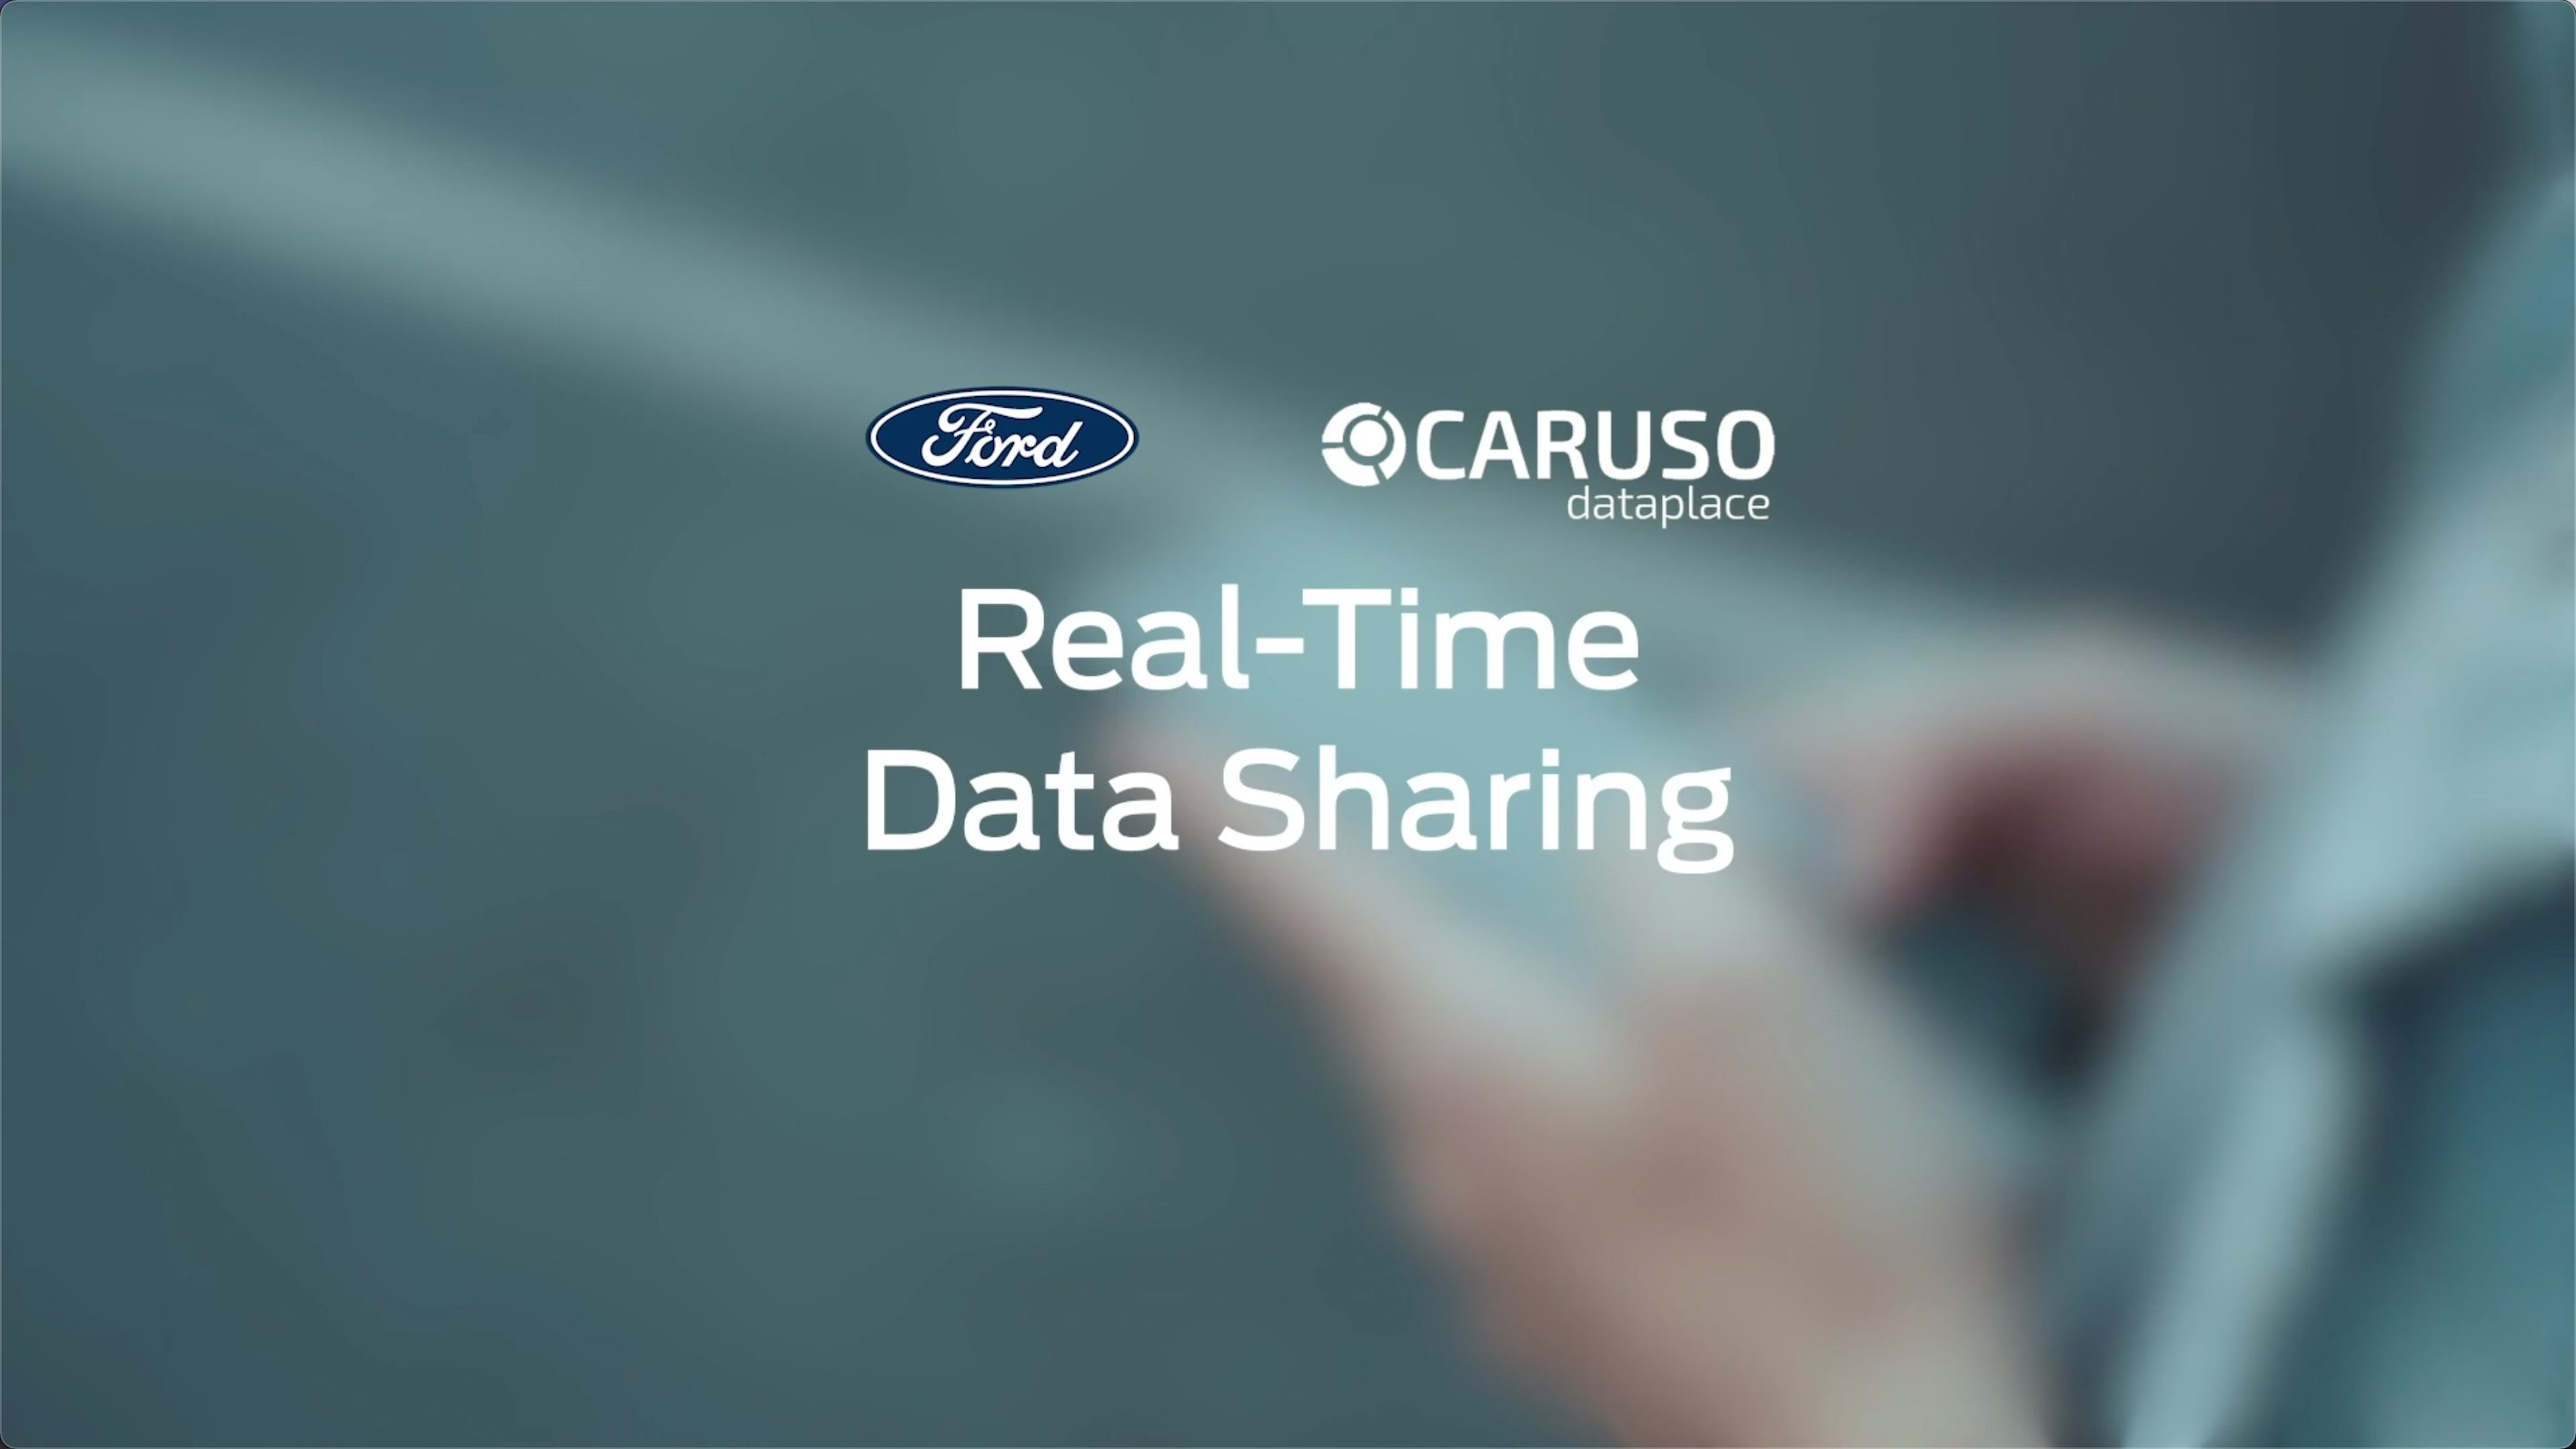 CARUSO and FORD – Real-Time Car Data Sharing